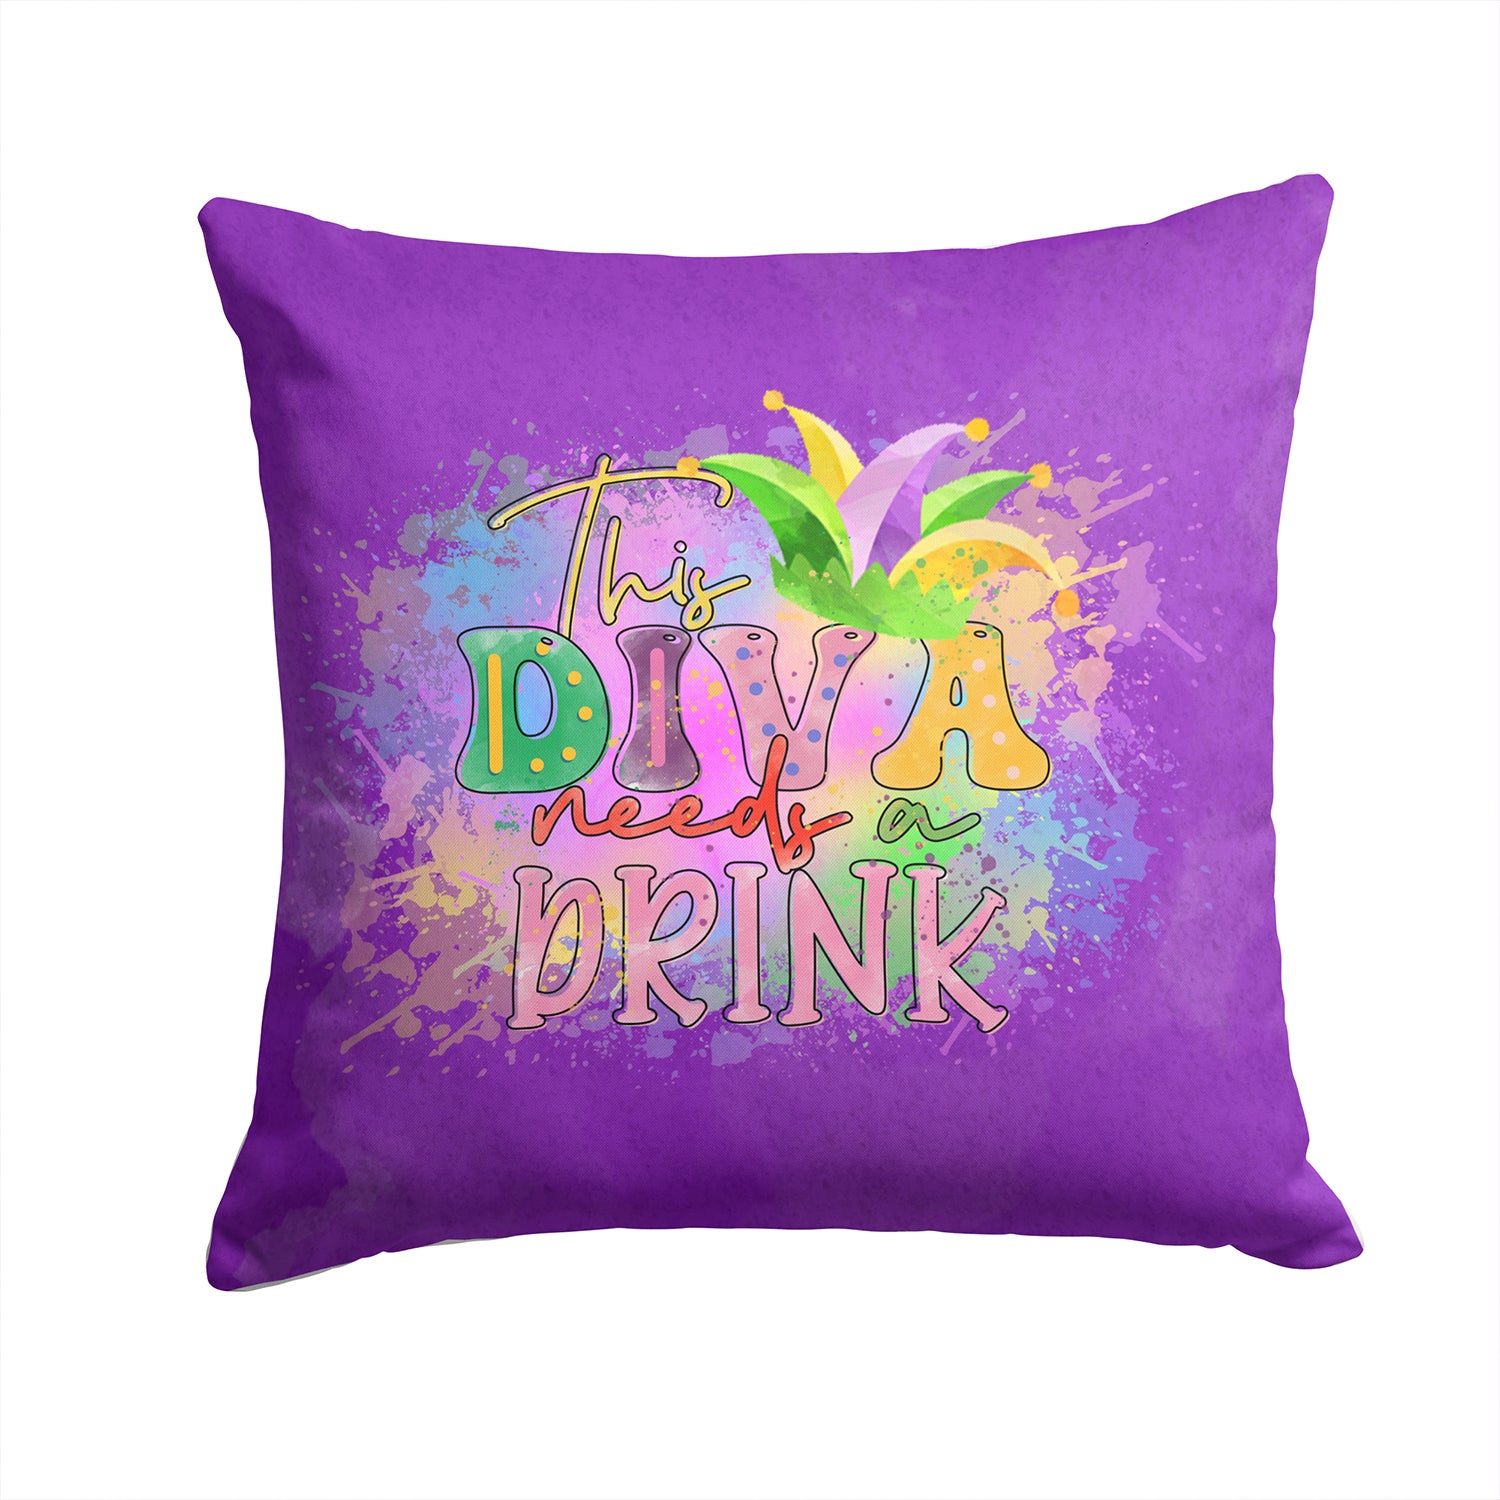 Buy this This Diva needs a Drink Mardi Gras Fabric Decorative Pillow